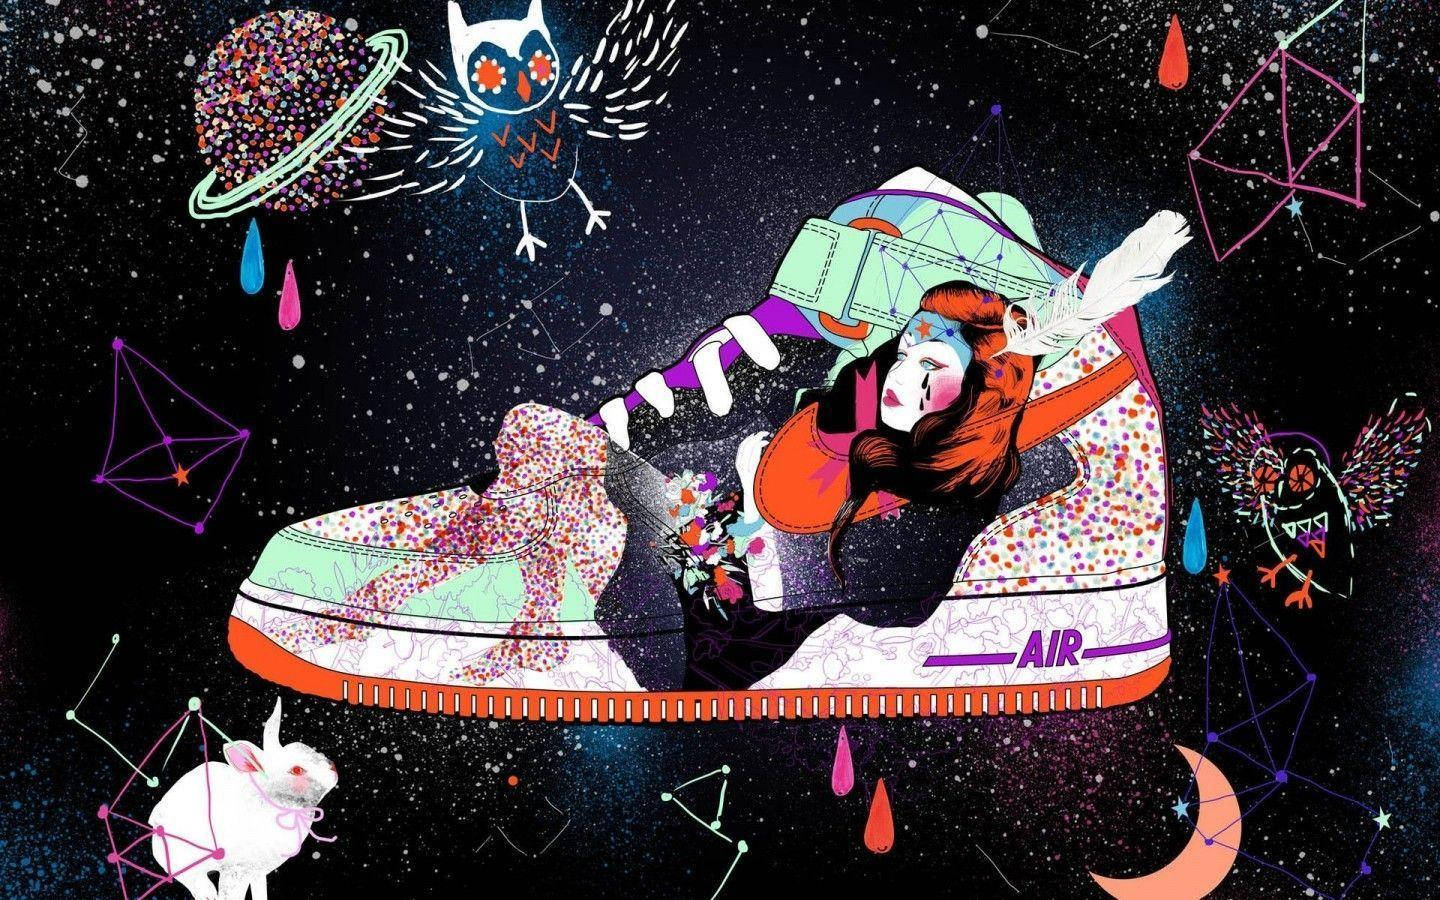 A Colorful Illustration Of A Sneaker With A Cat And Stars Wallpaper